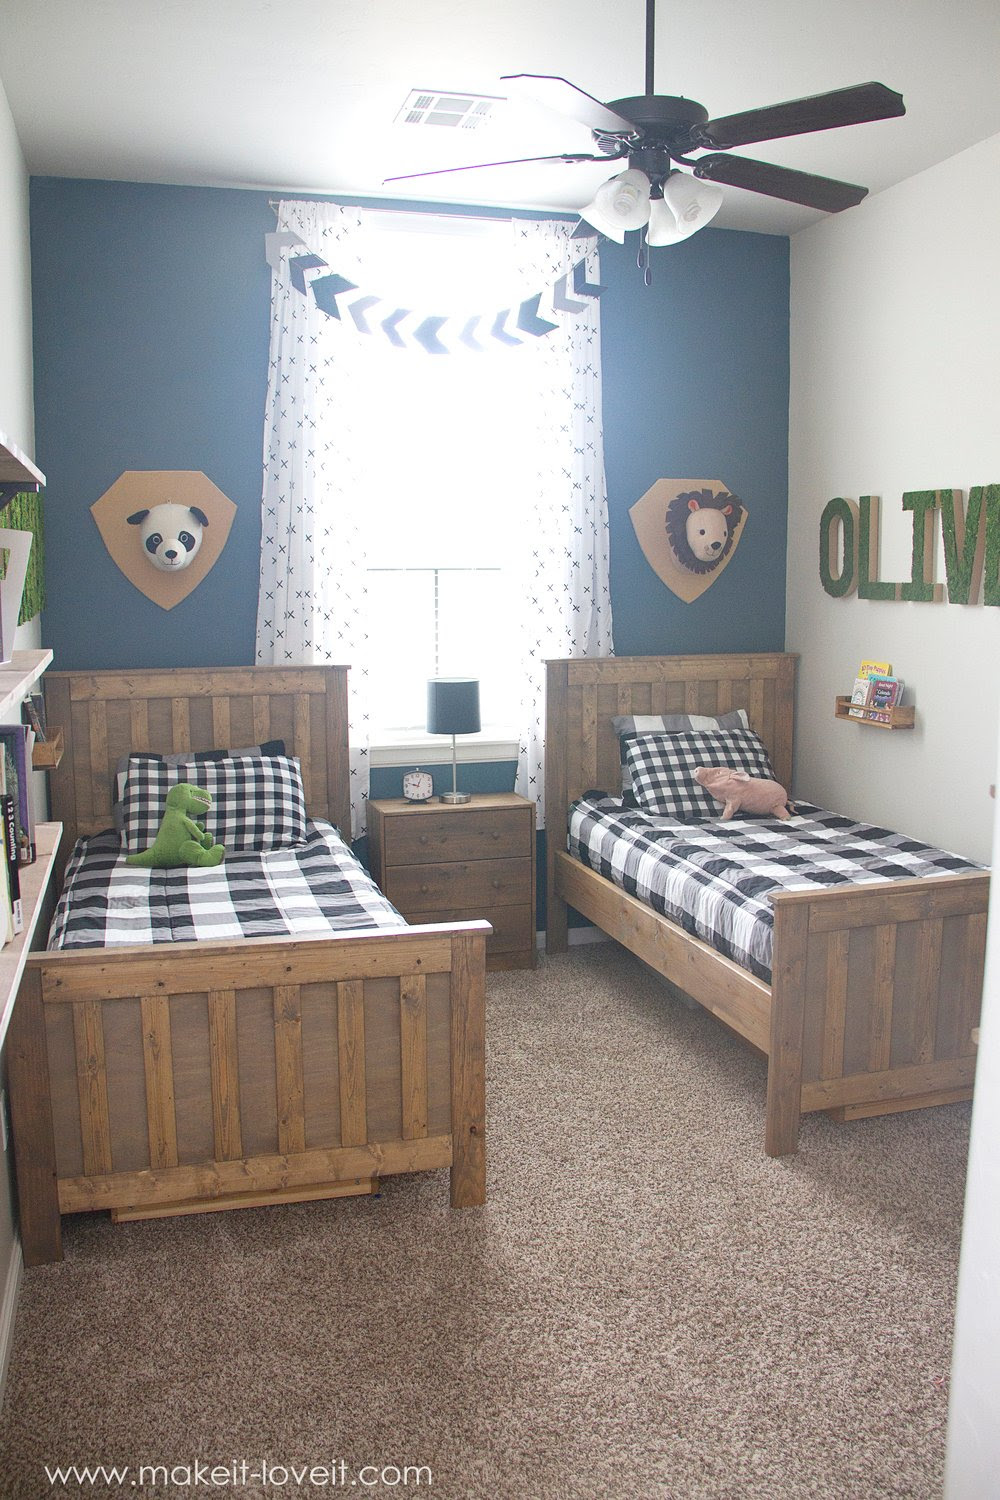  Ideas  for a Shared BOYS  Bedroom  yay all done Make 